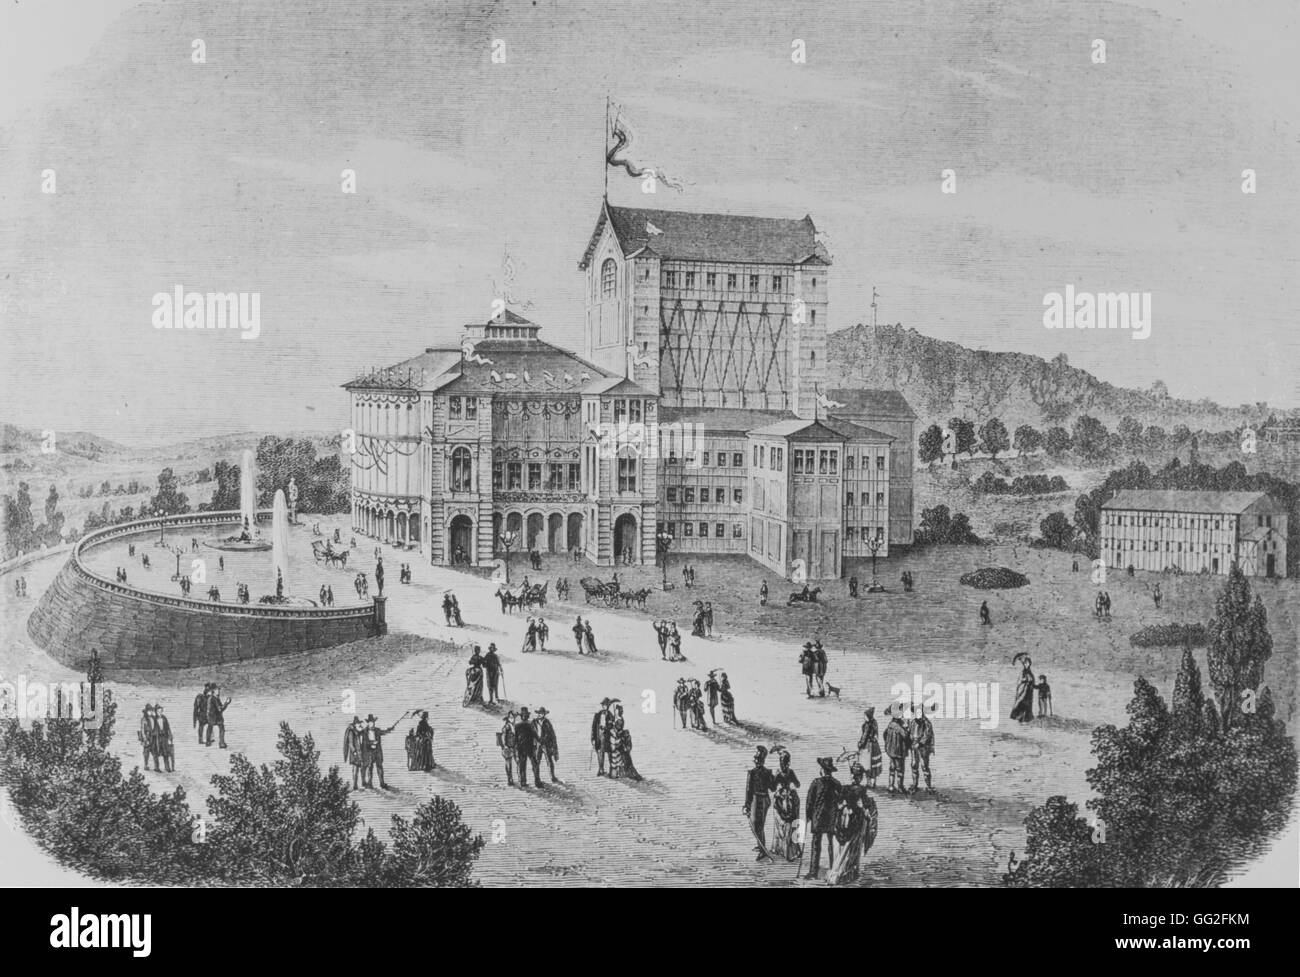 The Bayreuth Festspielhaus, opera house solely dedicated to the performance of operas by Richard Wagner. Engraving made in 1876, the year the opera house was inaugurated Stock Photo